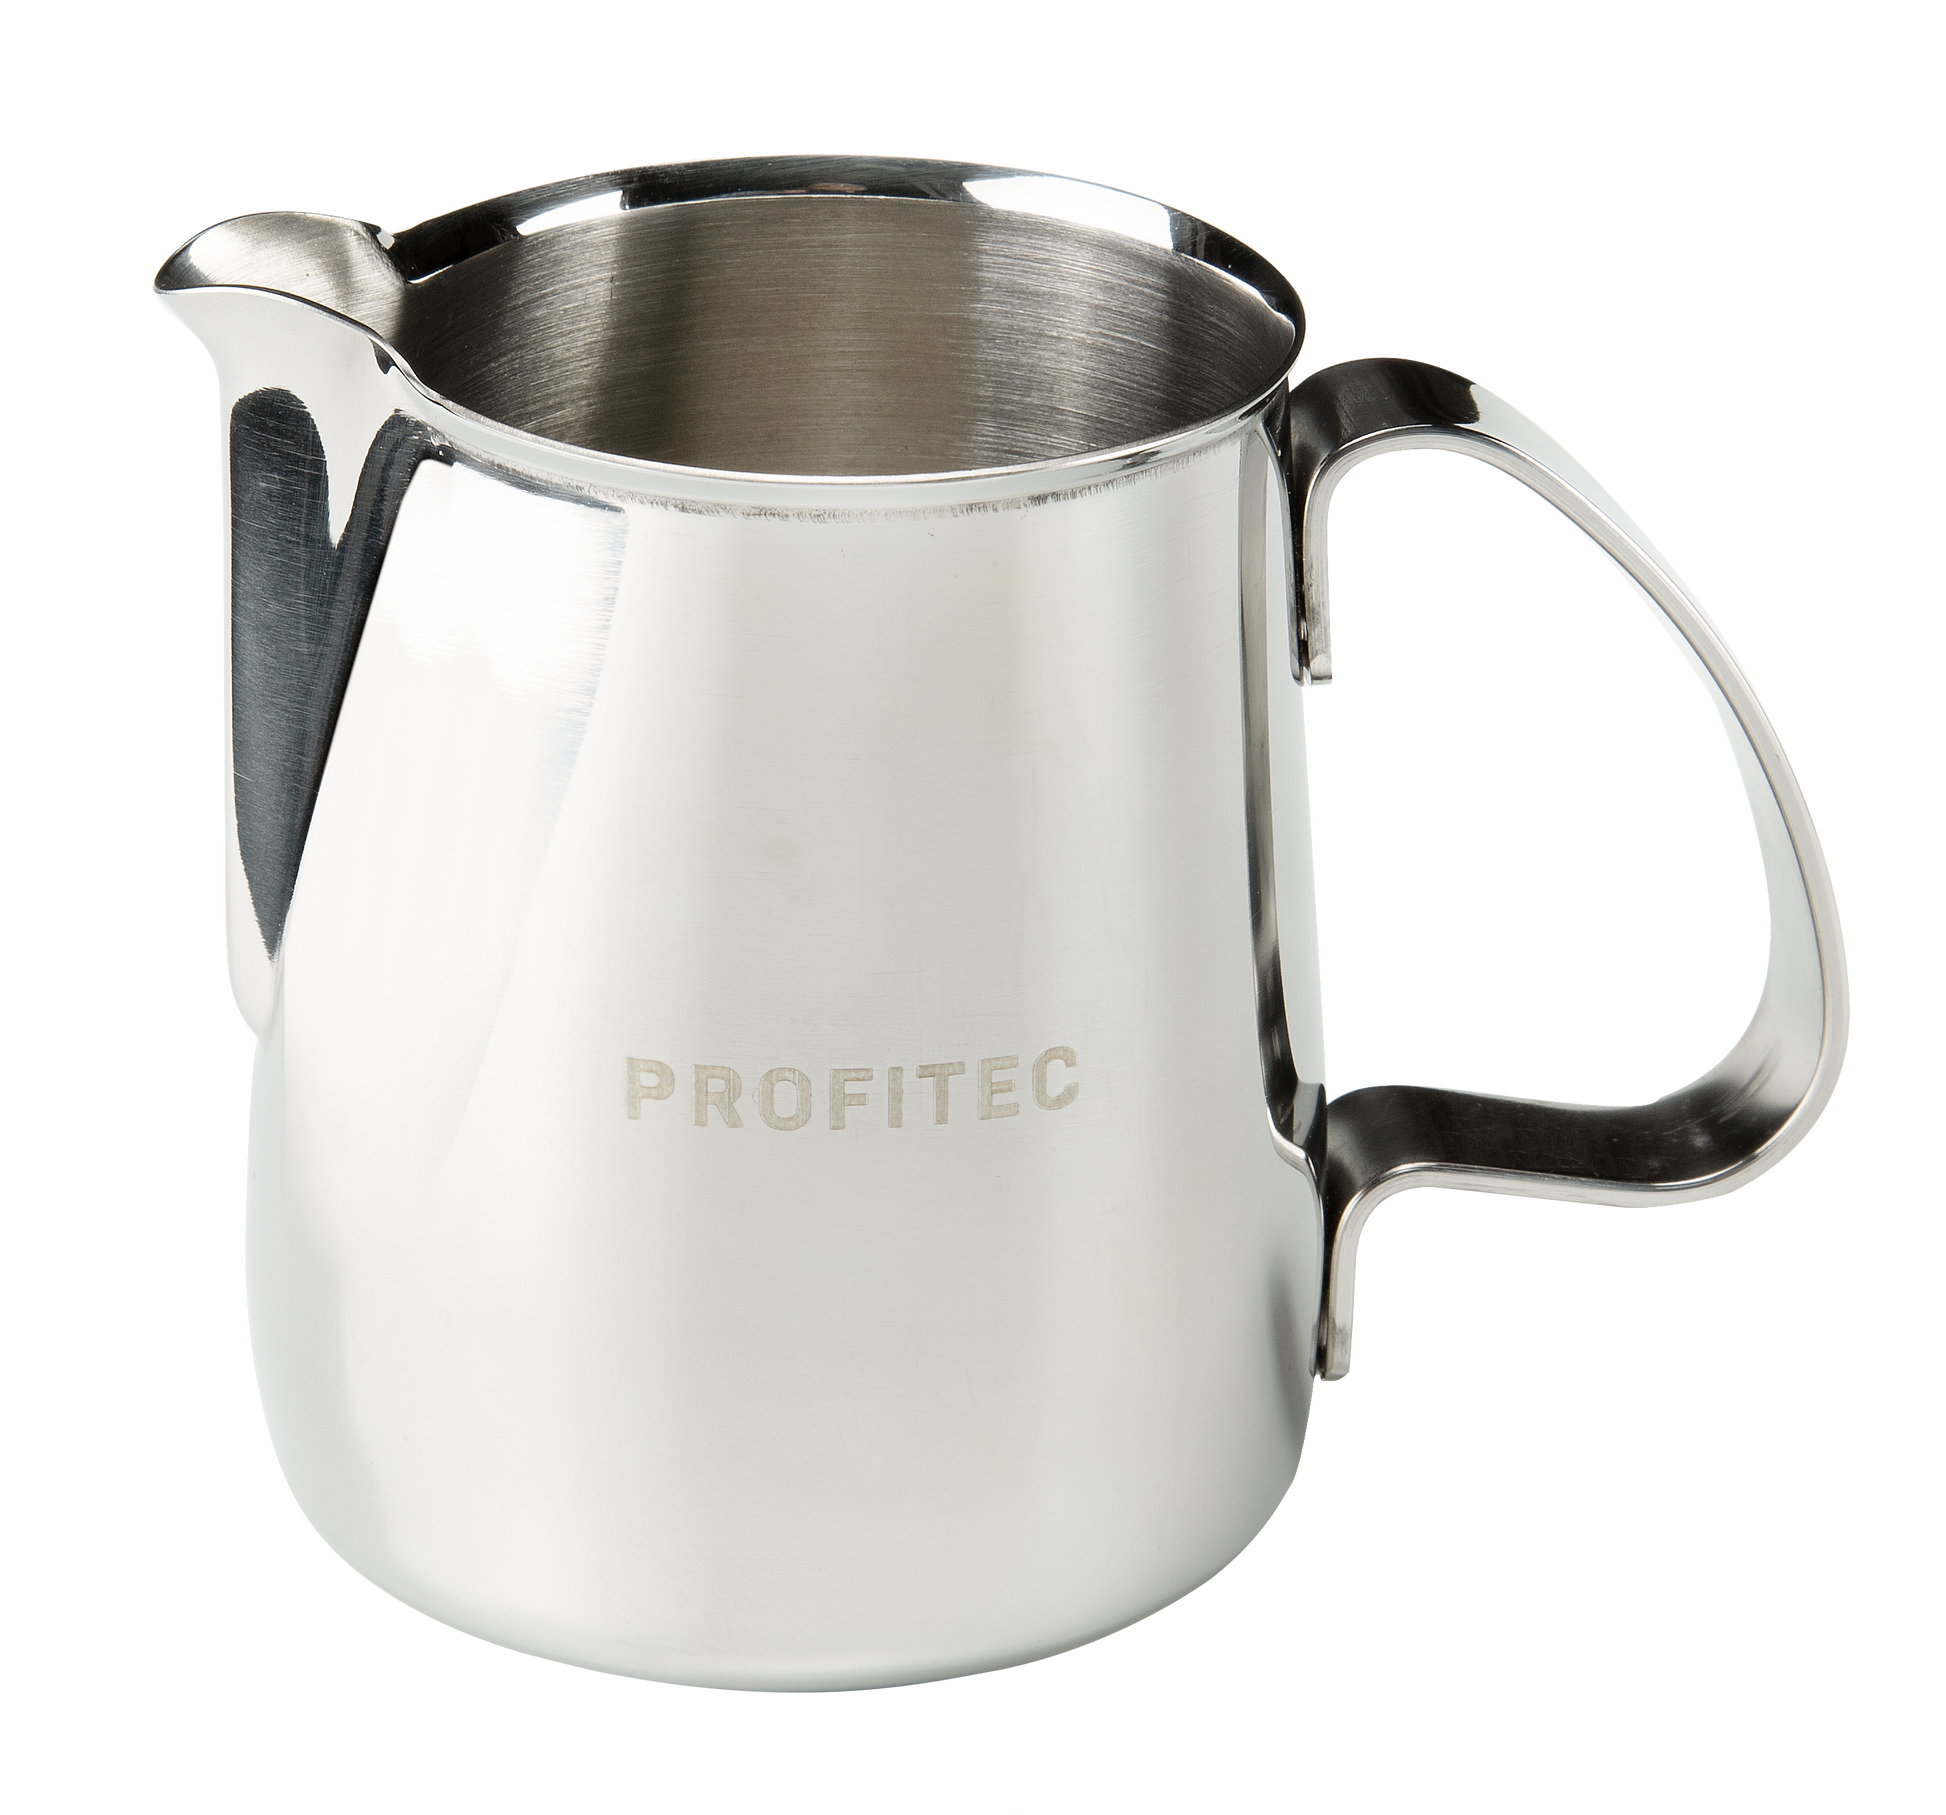 12 Oz. Frothing Milk Pitcher 